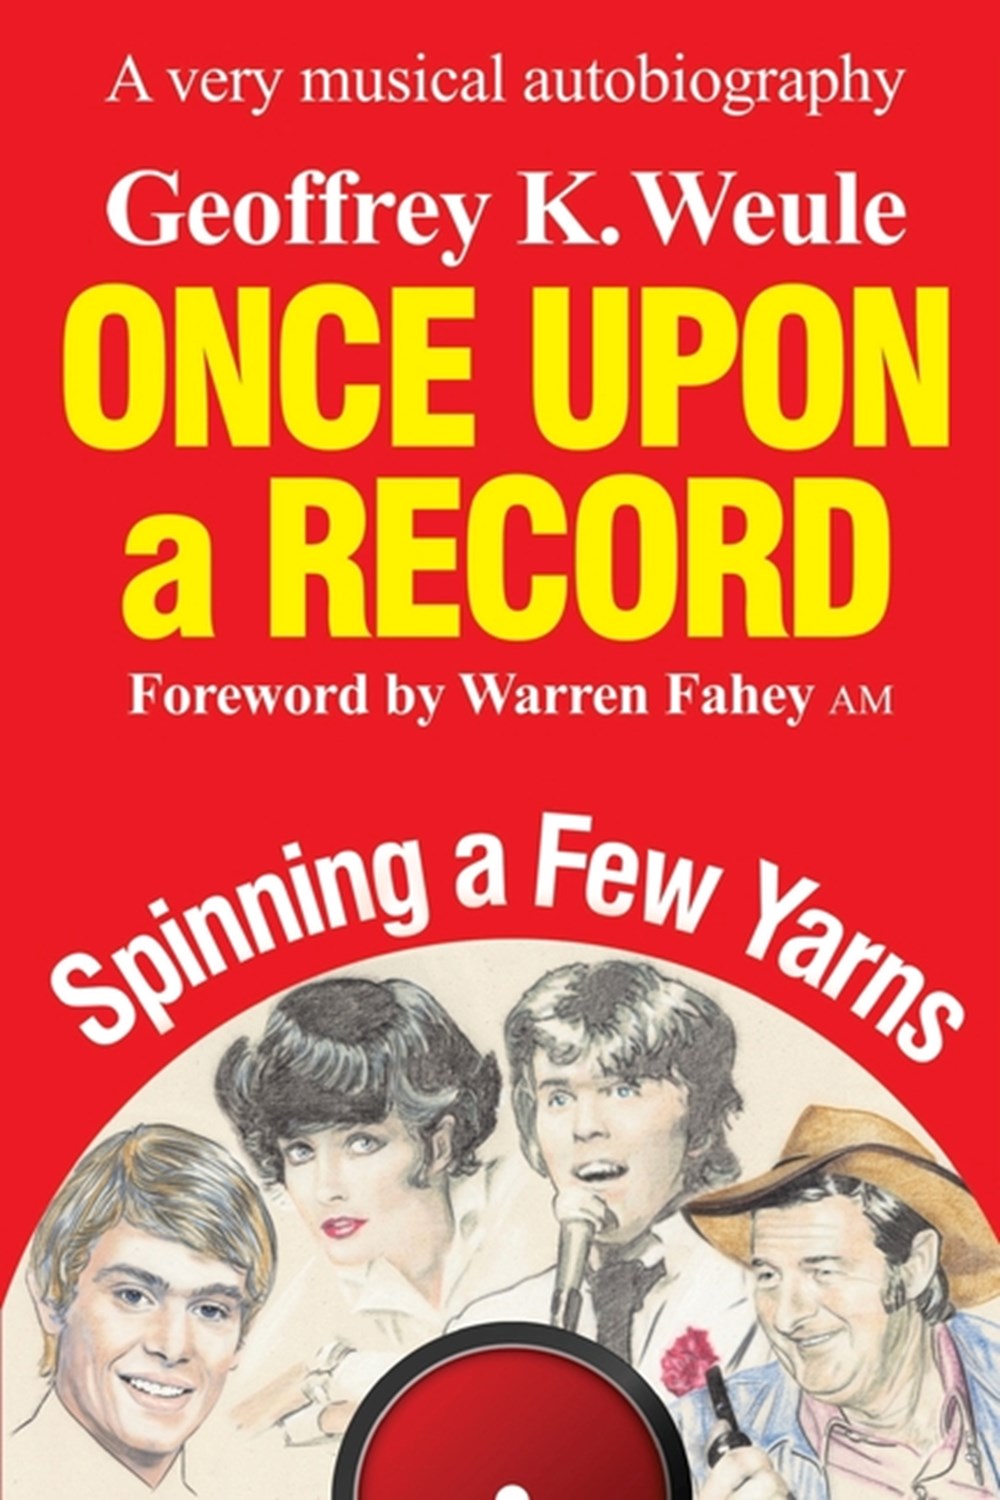 Once Upon a Record A very musical autobiography